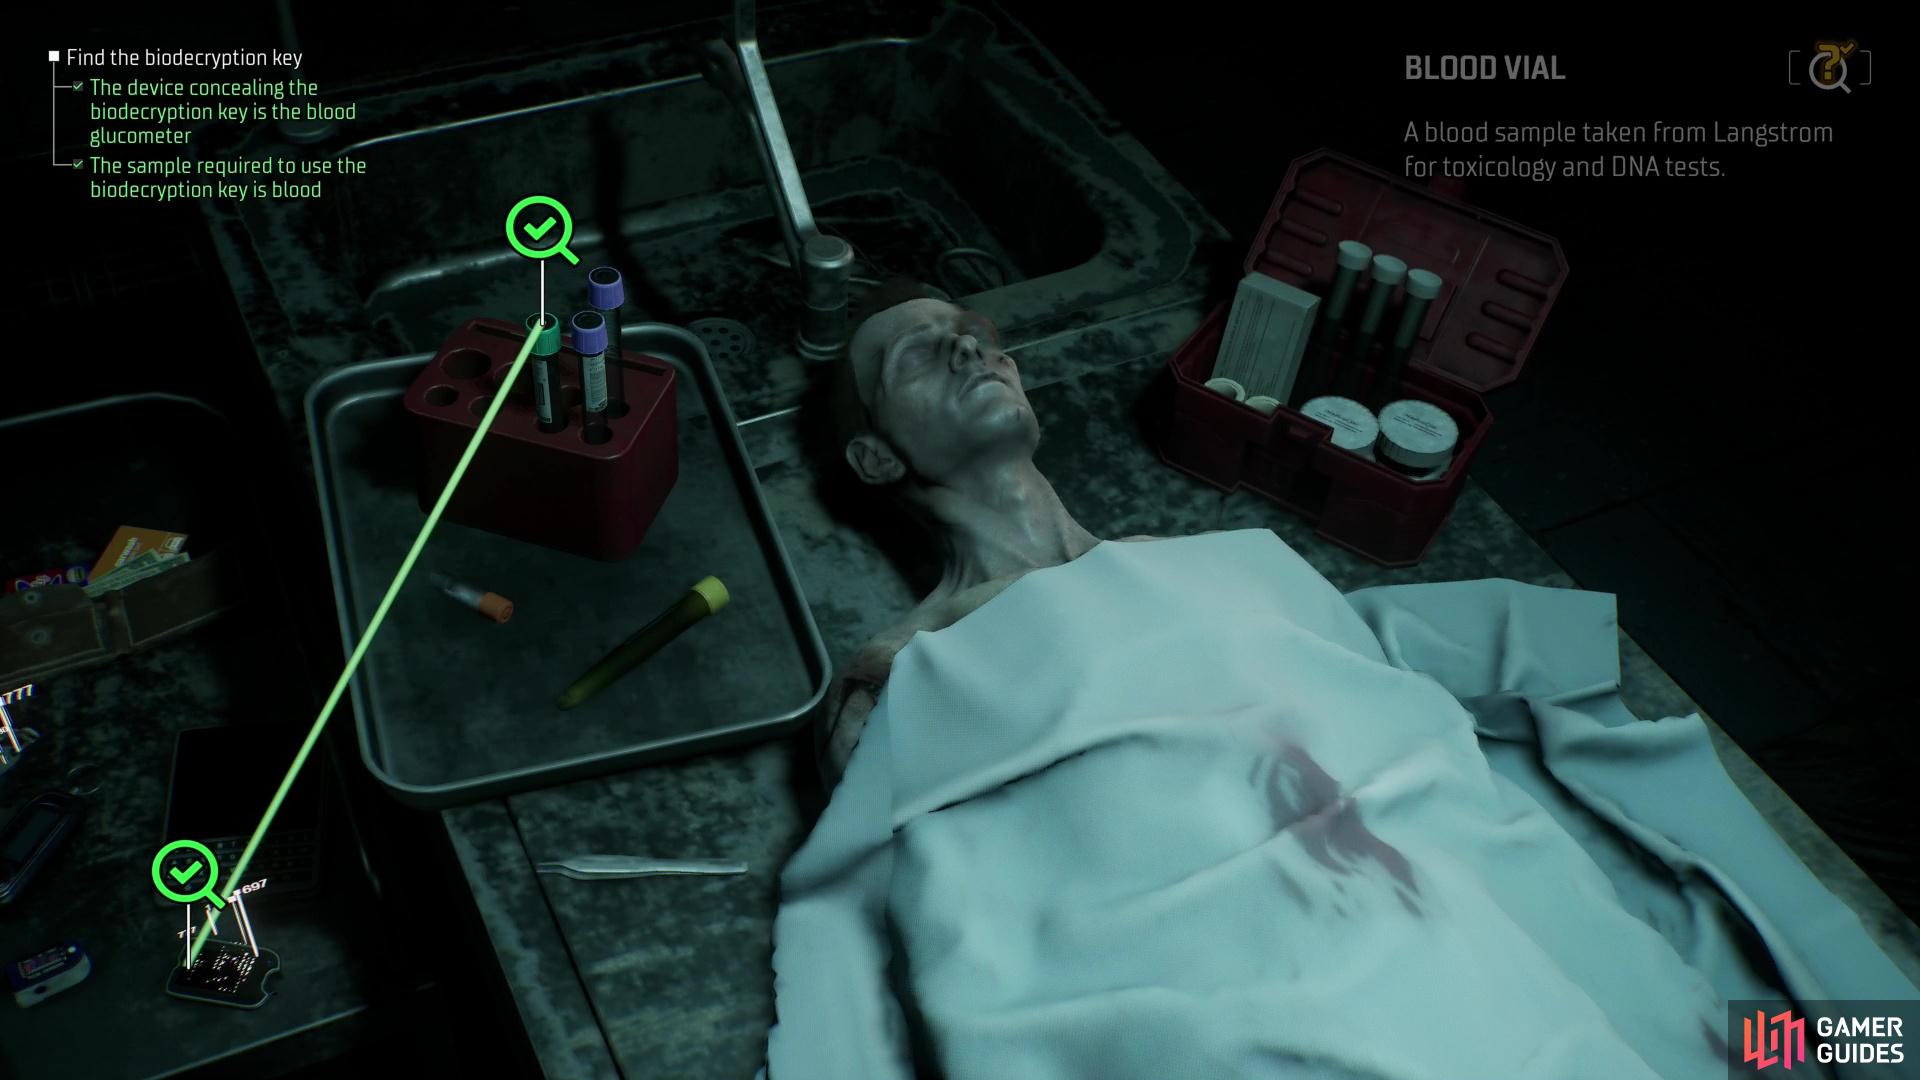 Select the Blood Glucometer and the Blood Vials to discover the Biodecryption Key.